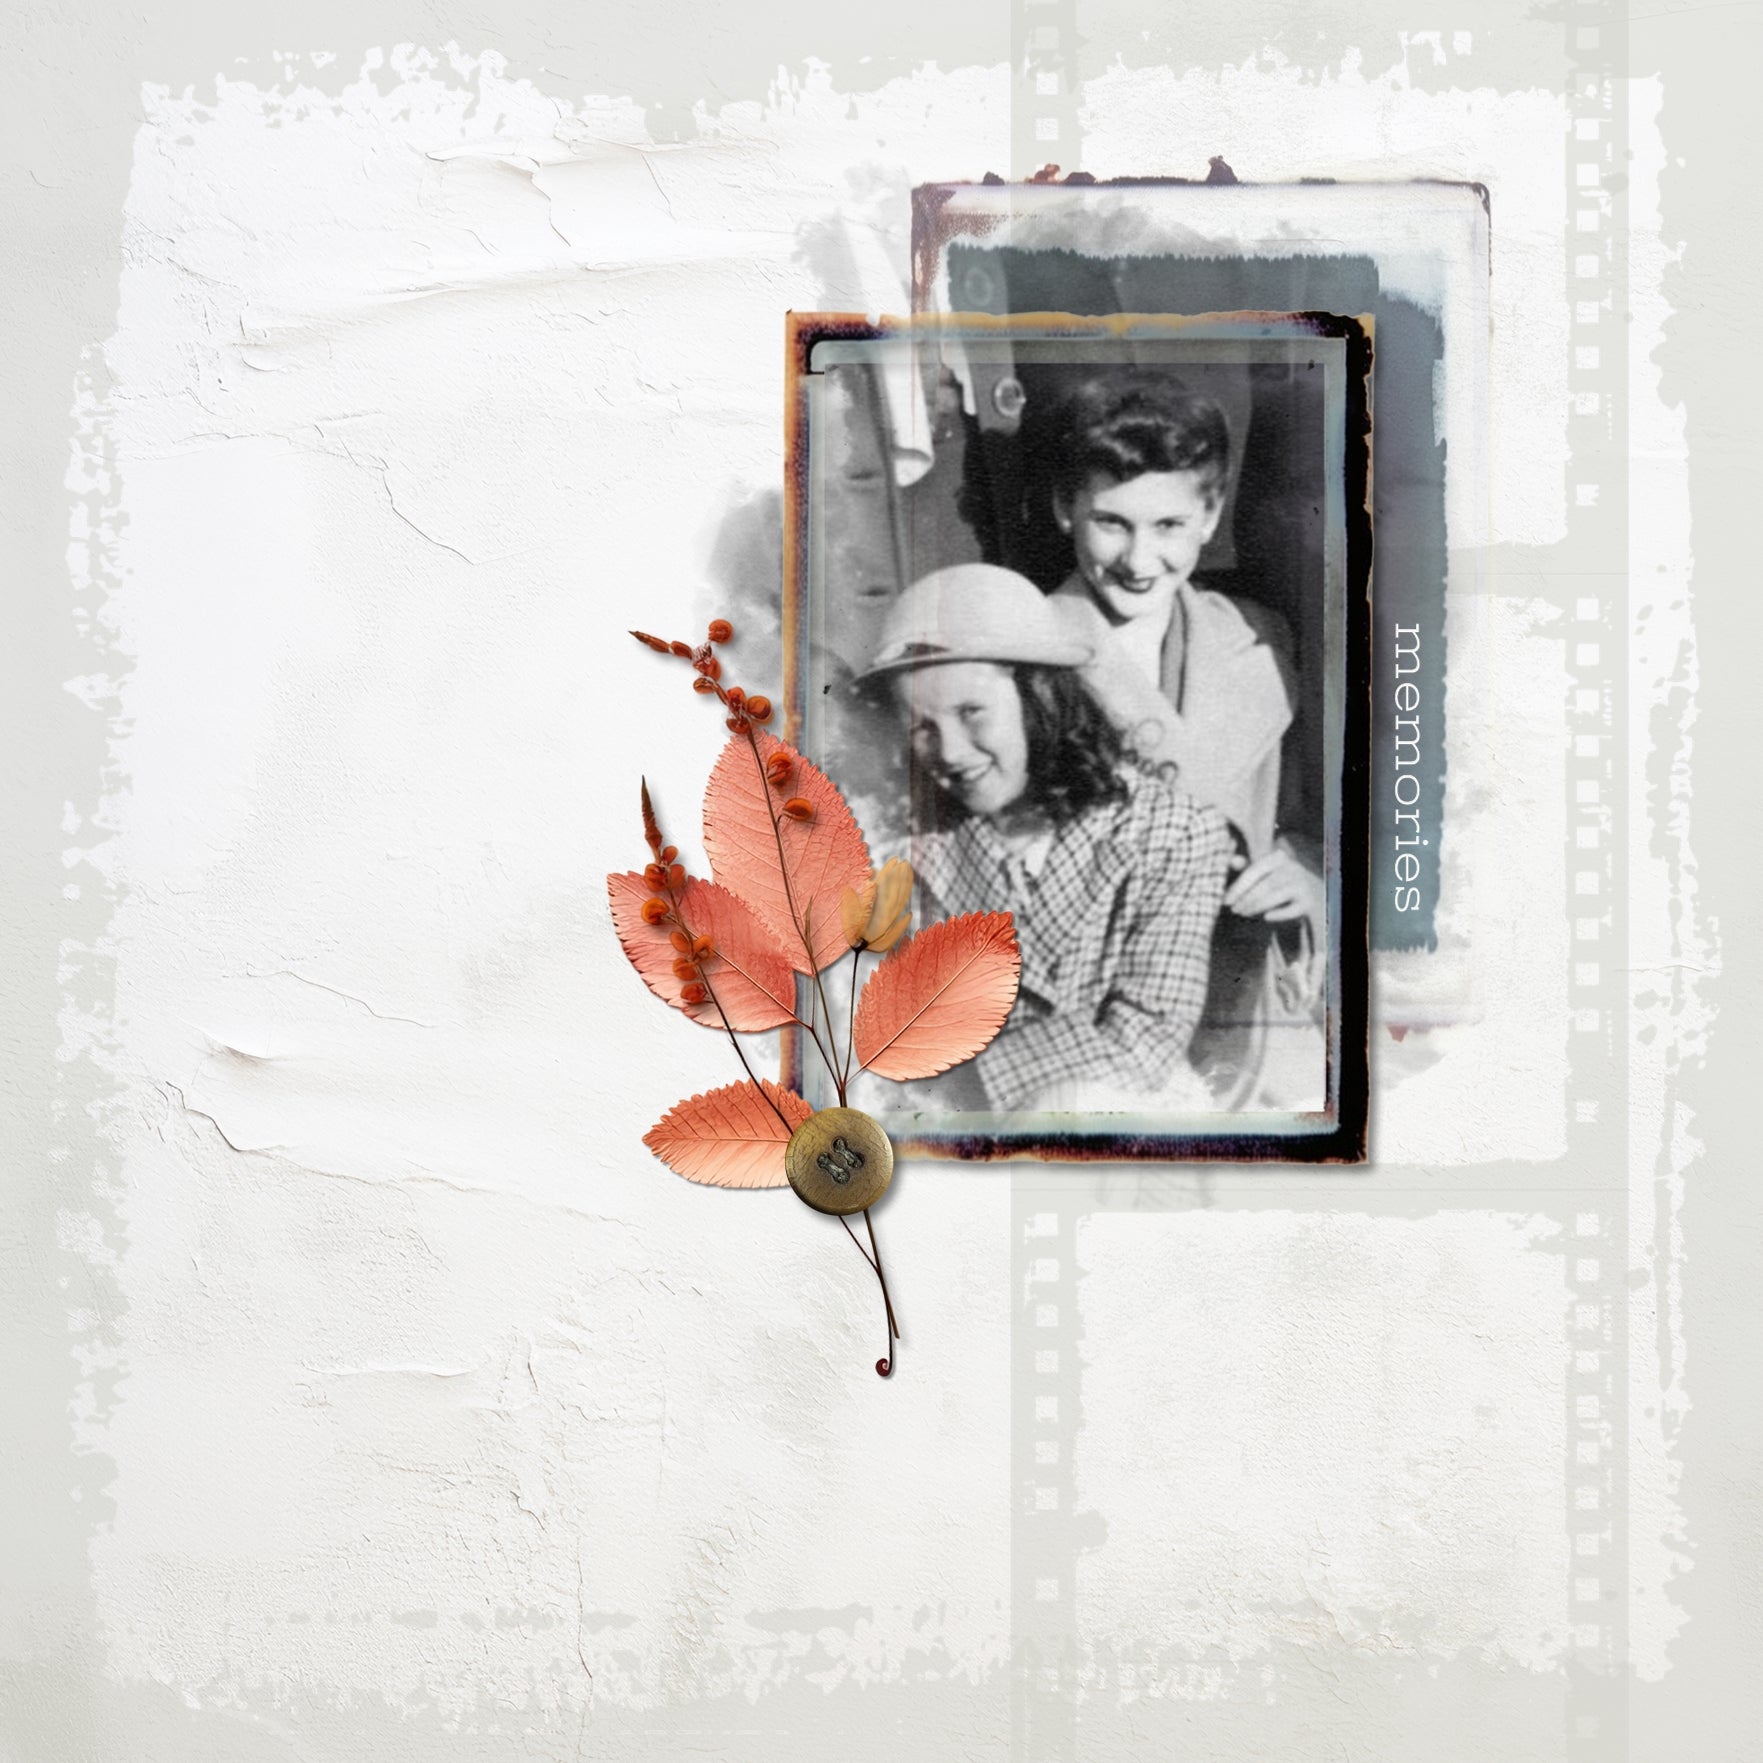 Accent your favorite photos or frame your digital scrapbook pages with these grunge film strip overlays by Lucky Girl Creative digital art. All elements in the kit are black and easily colorized or filled with your favorite papers to fit your chosen photos. This kit is included in the Grunge Photo Transfer Mega Bundle.